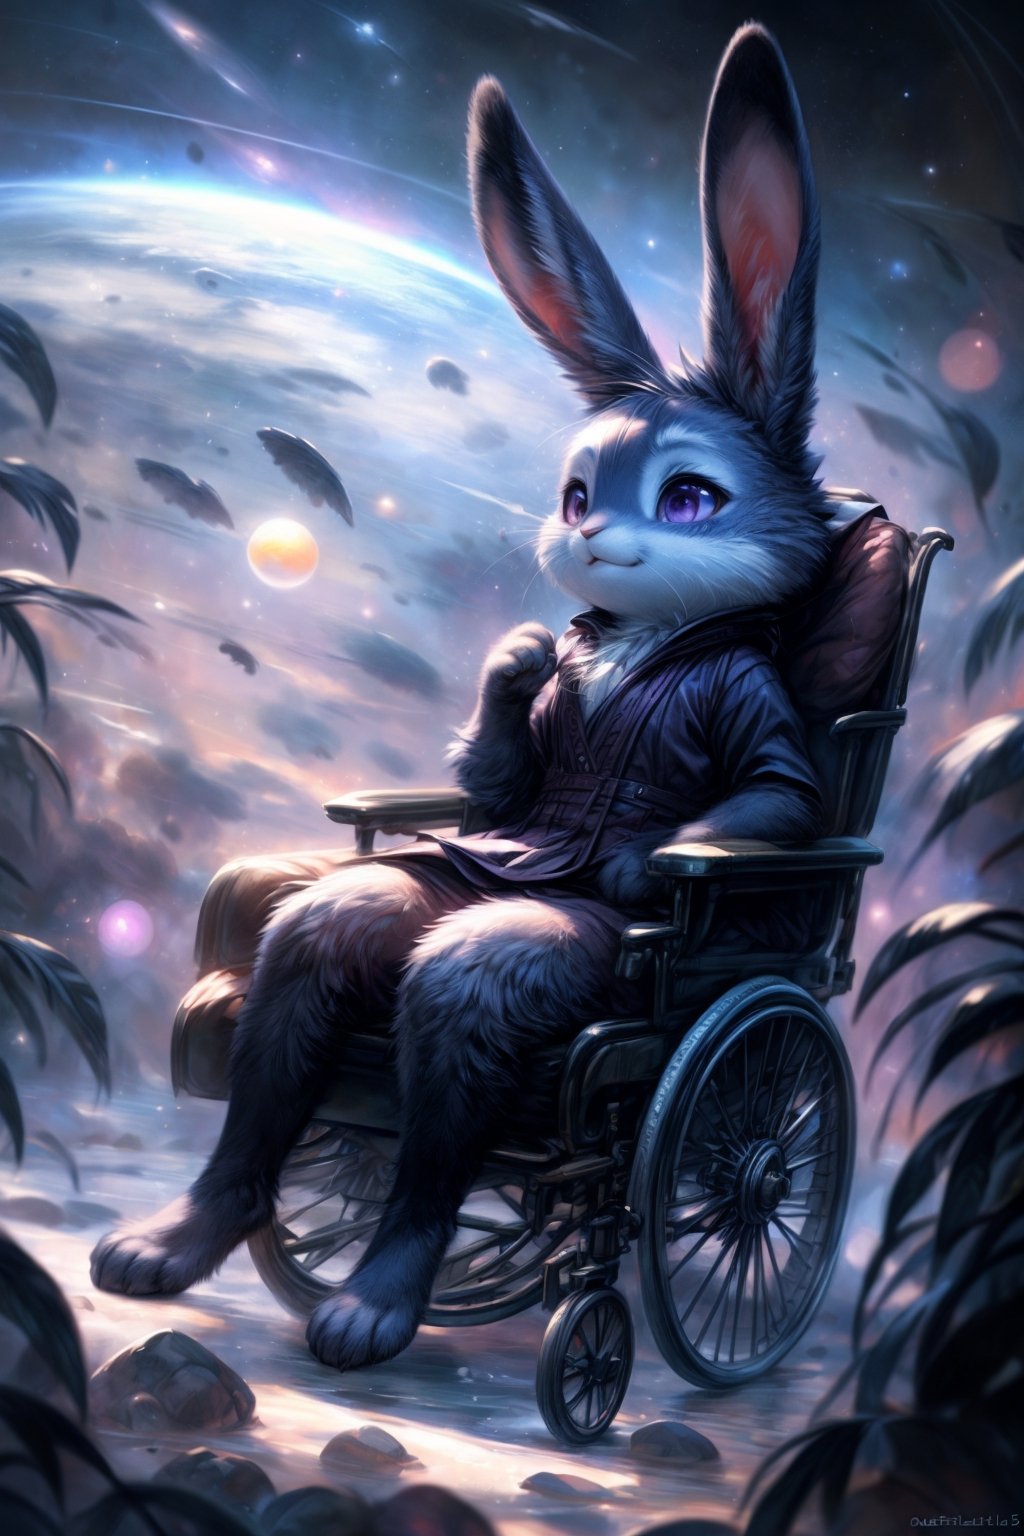 by kenket, by totesfleisch8, (by thebigslick, by silverfox5213:0.8), (by syuro:0.2), (by qupostuv35:1.2), (hi res), ((masterpiece)), ((best quality)), illustration,anthro,furry,kemono,bunny,rabbit,animal ears, body fur,1girl,planet earth in the sky,indigo hair,long hair,violet eyes,1910s dress,wheelchair,moonflowers,exposure blend, medium shot, bokeh, furry rabbit nose, (hdr:1.4), high contrast, (cinematic, indigo and violet:0.85), (muted colors, dim colors, soothing tones:1.3), low saturation, (hyperdetailed:1.2), (noir:0.4),FurryCore